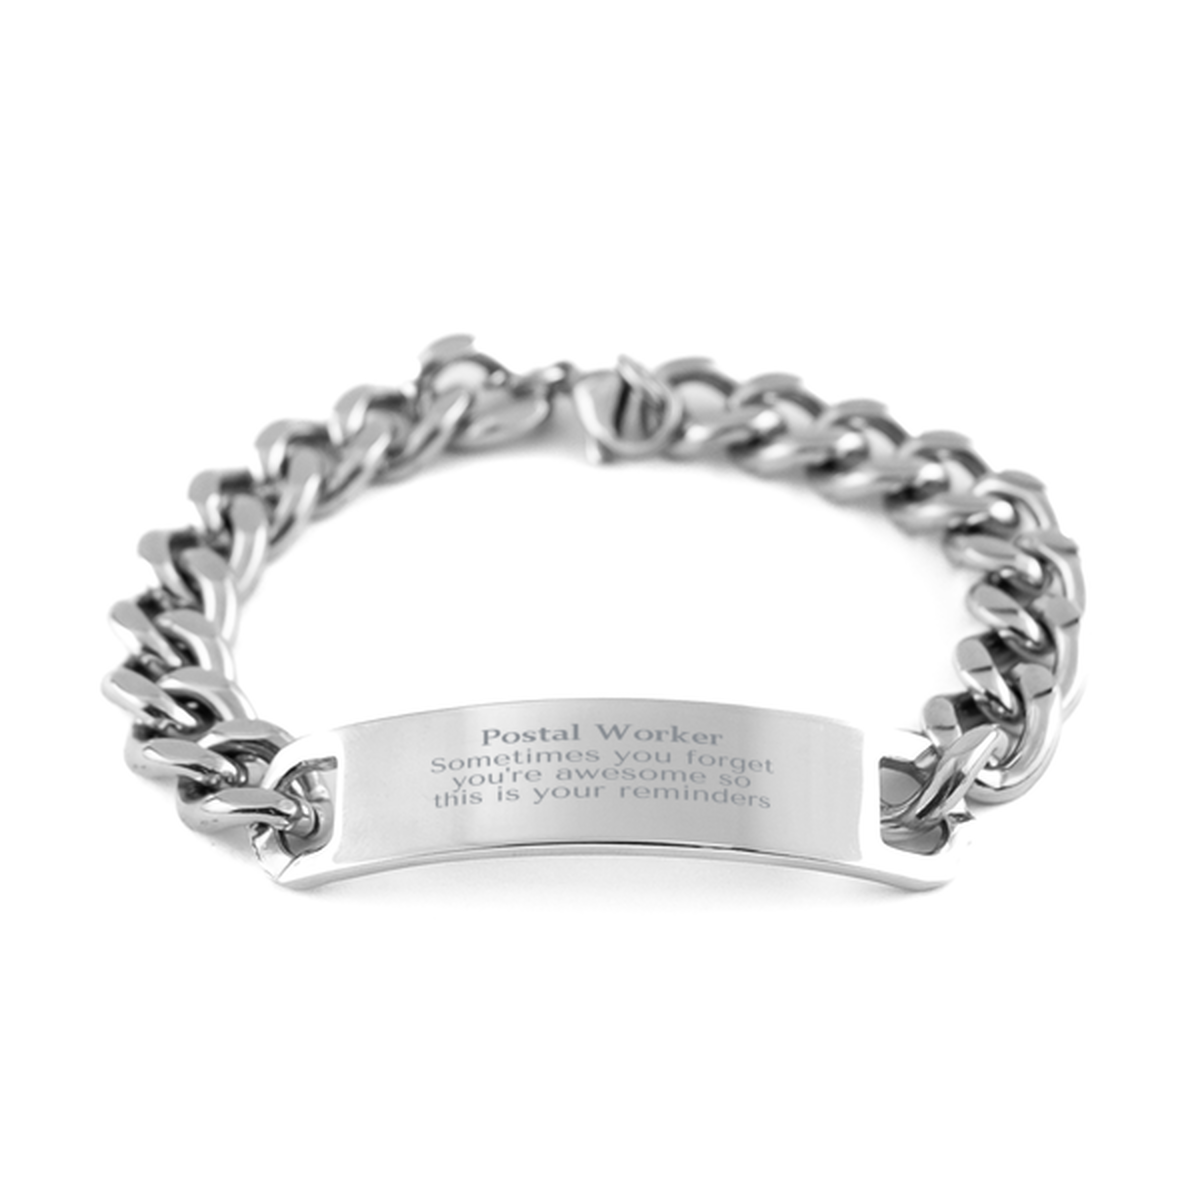 Sentimental Postal Worker Cuban Chain Stainless Steel Bracelet, Postal Worker Sometimes you forget you're awesome so this is your reminders, Graduation Christmas Birthday Gifts for Postal Worker, Men, Women, Coworkers